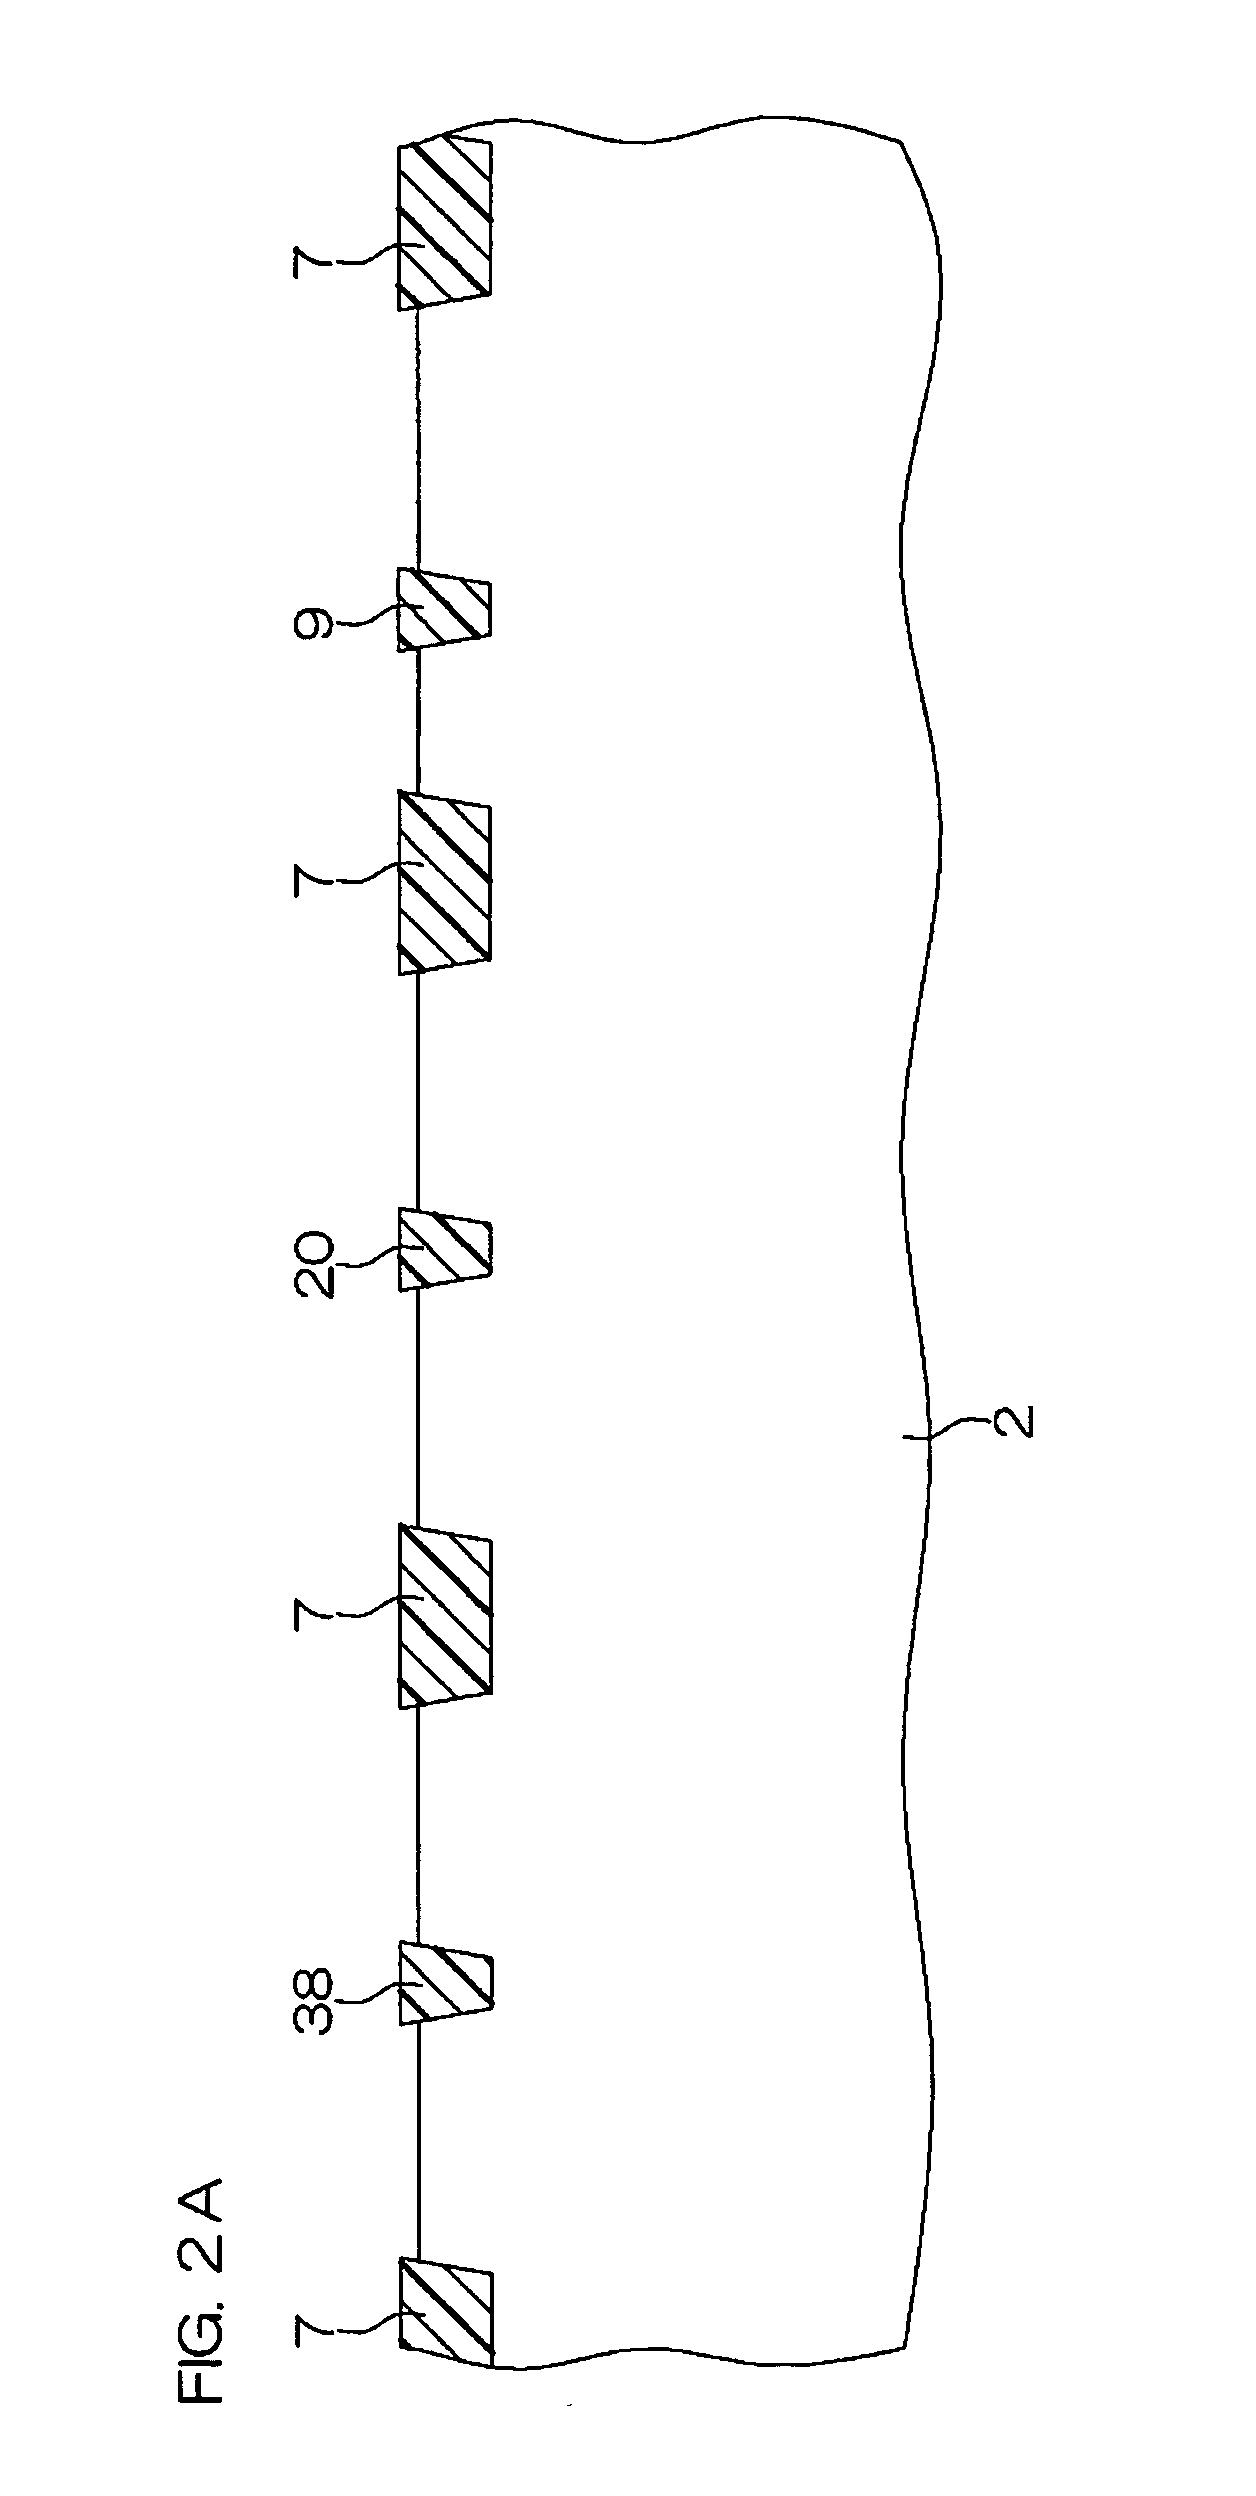 Semicoductor device